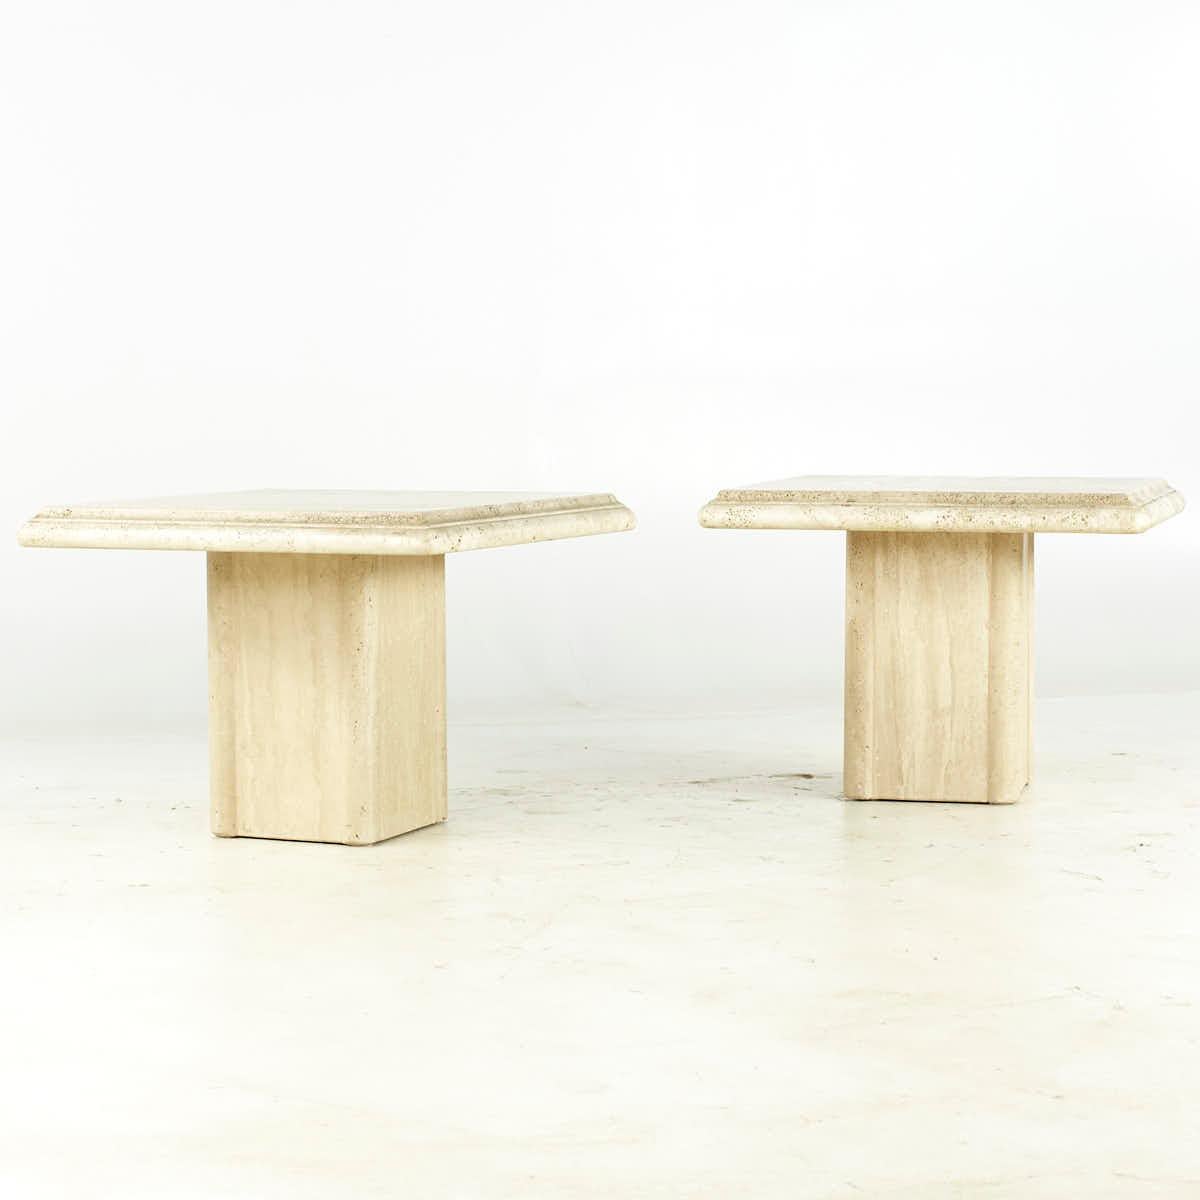 Mid Century Travertine Side Tables – Pair

Each side table measures: 27.75 wide x 27.75 deep x 20 inches high

All pieces of furniture can be had in what we call restored vintage condition. That means the piece is restored upon purchase so it’s free